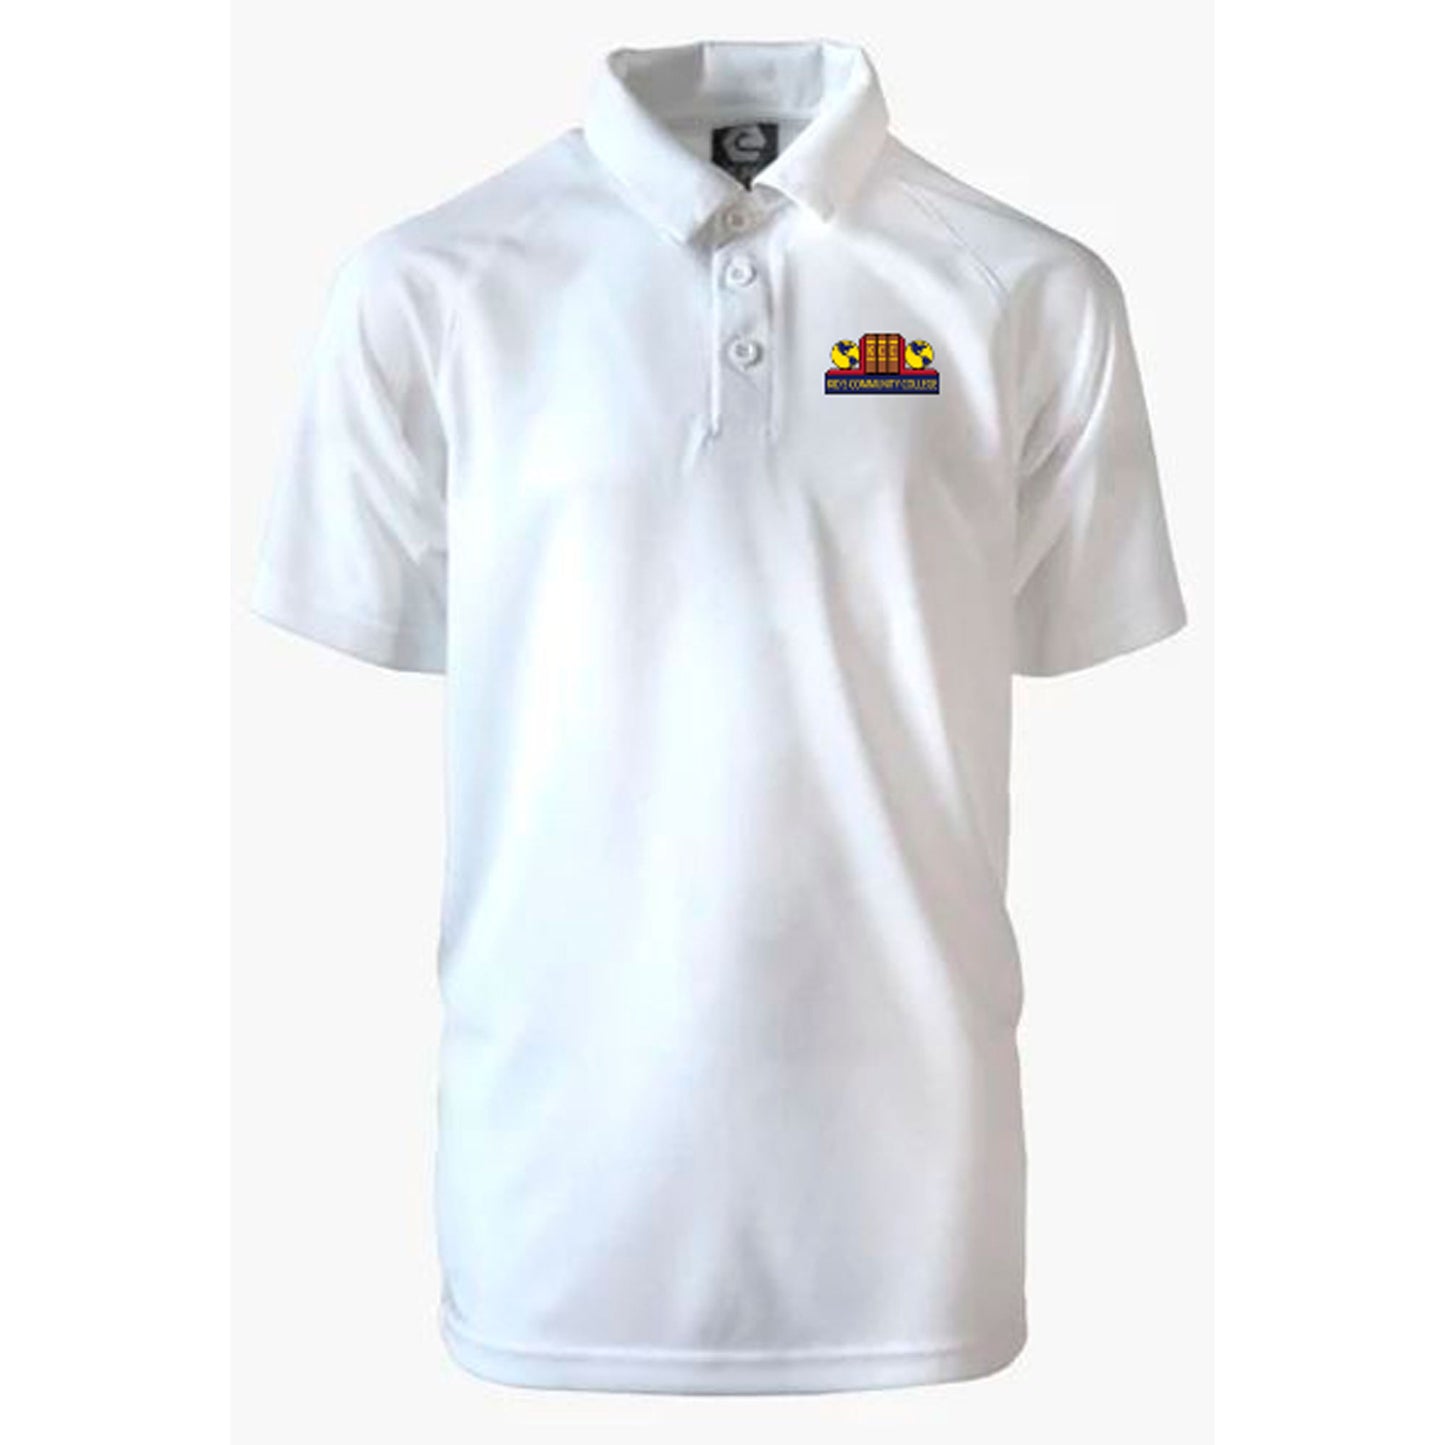 KCCSL Middle School Moisture Wicking Polo - SPECIAL ORDER!